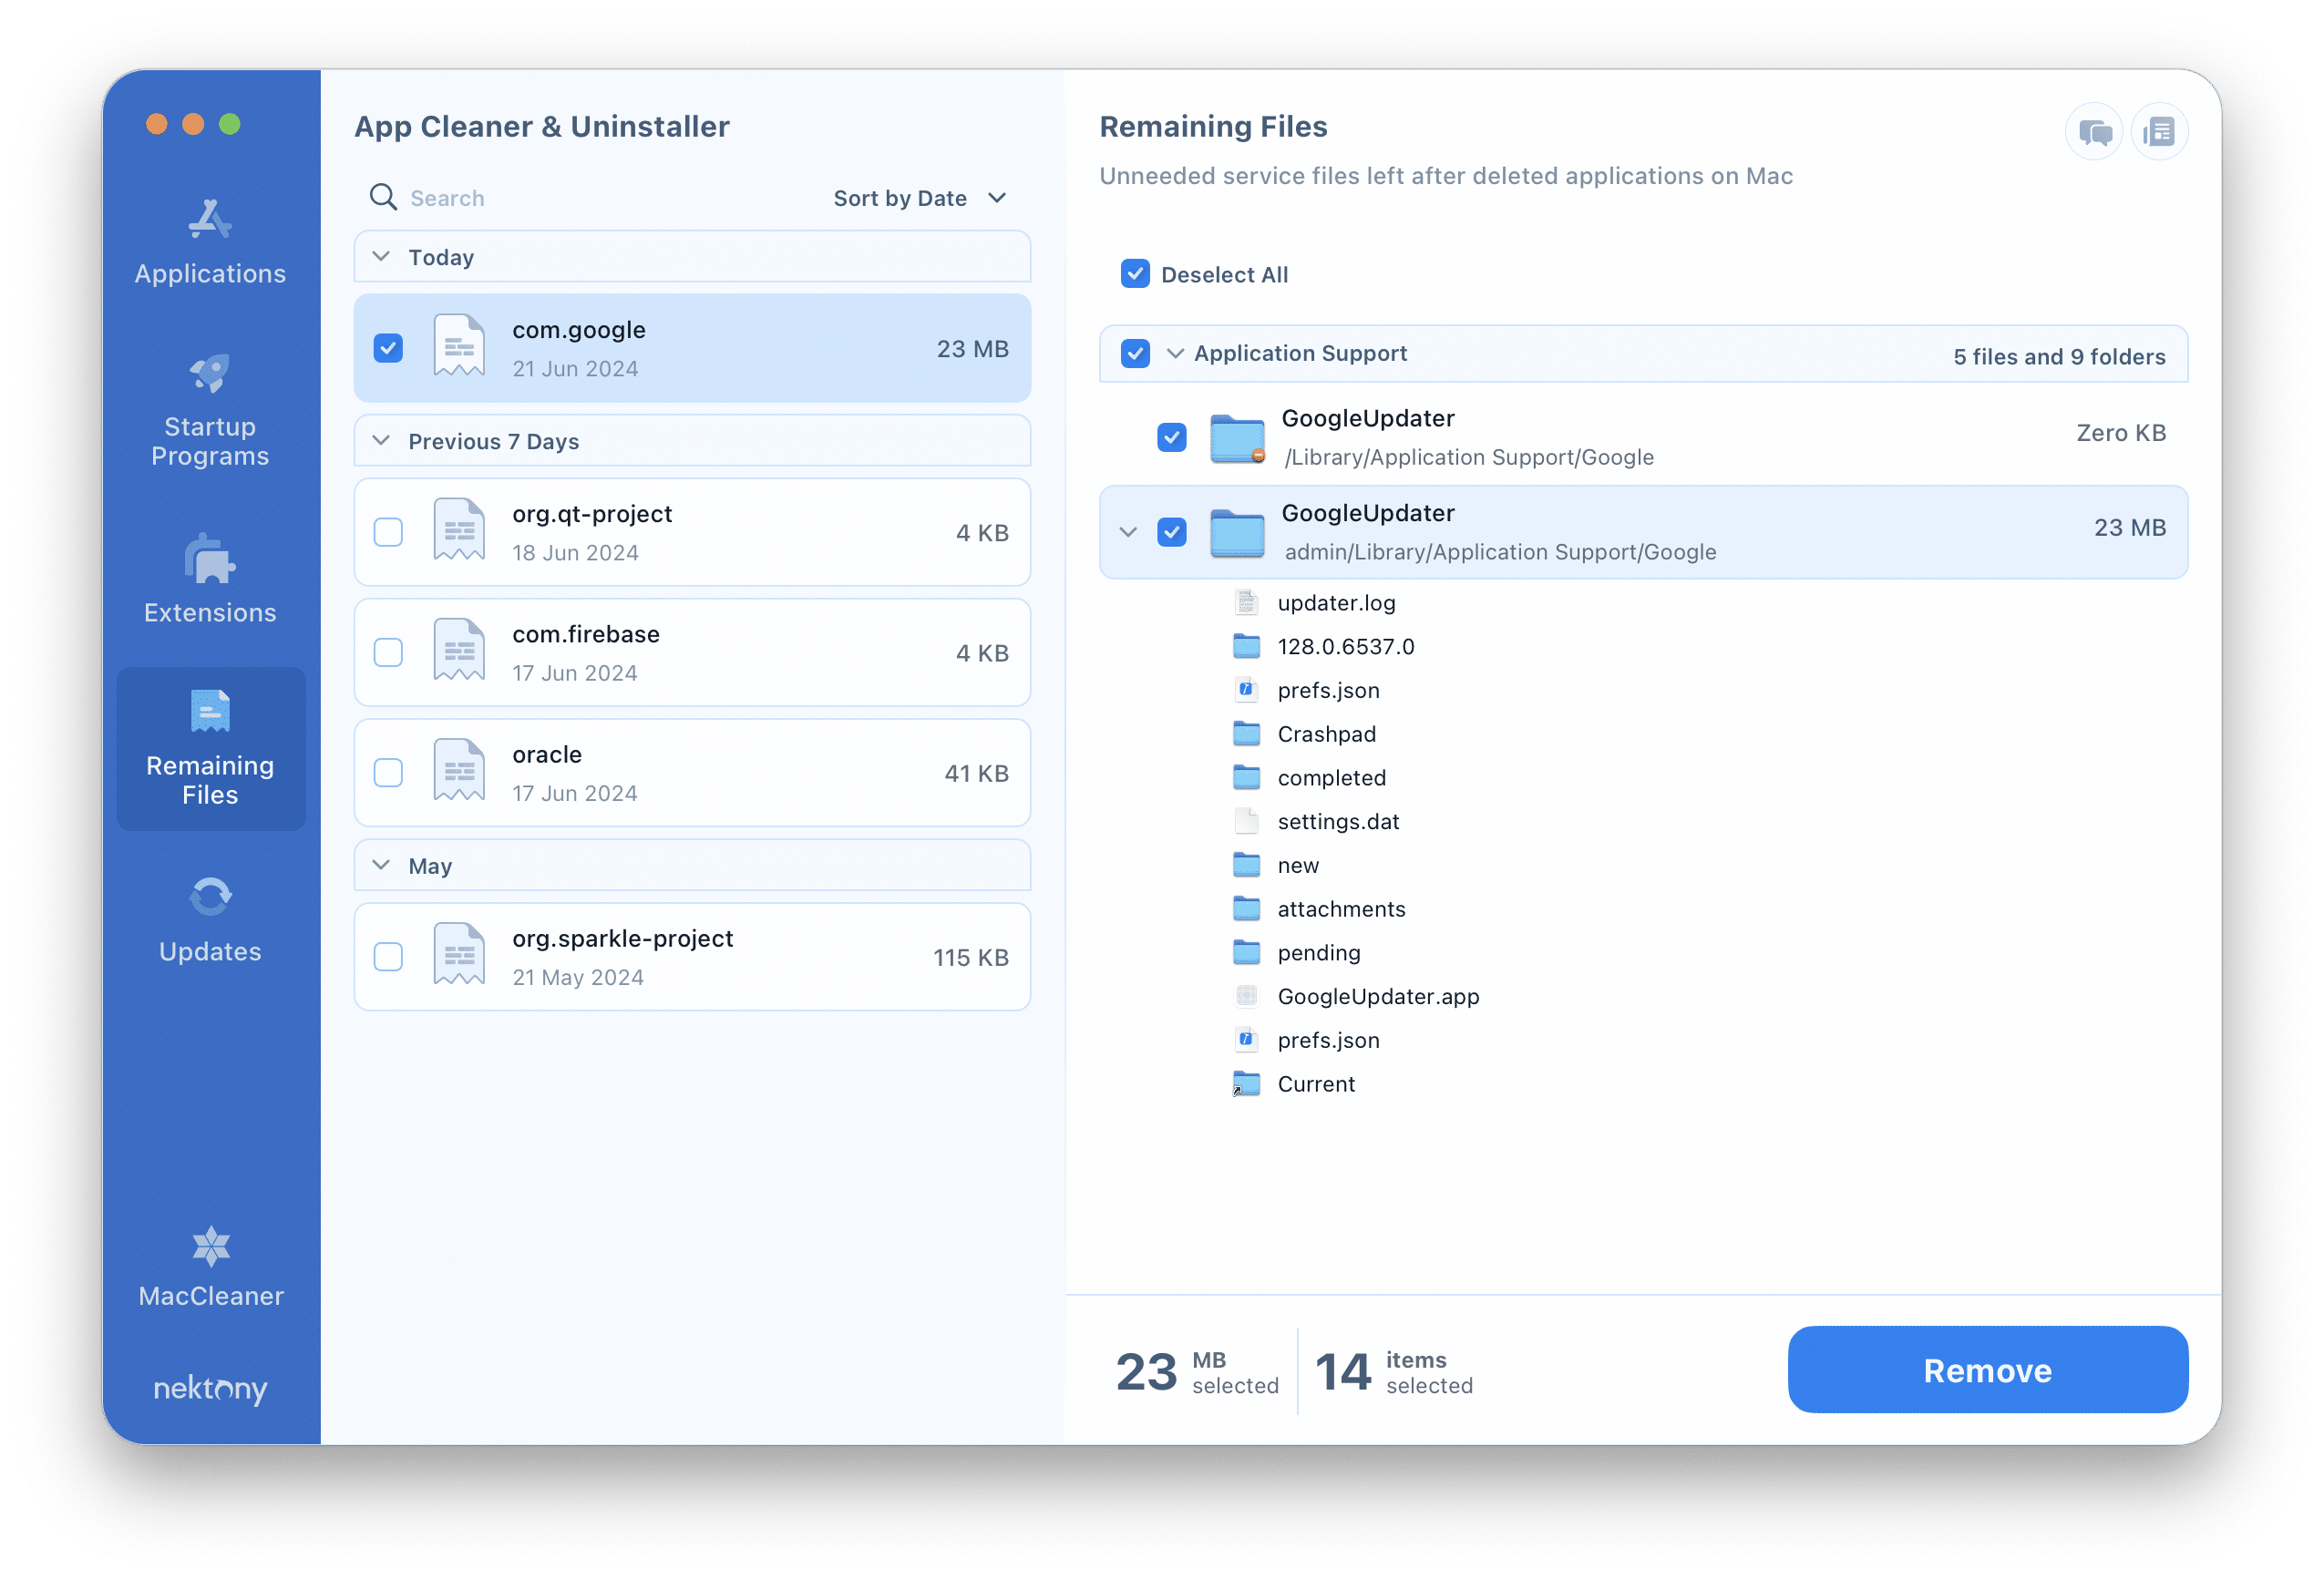 App Cleaner & Uninstaller window showing remaining files selected for removal